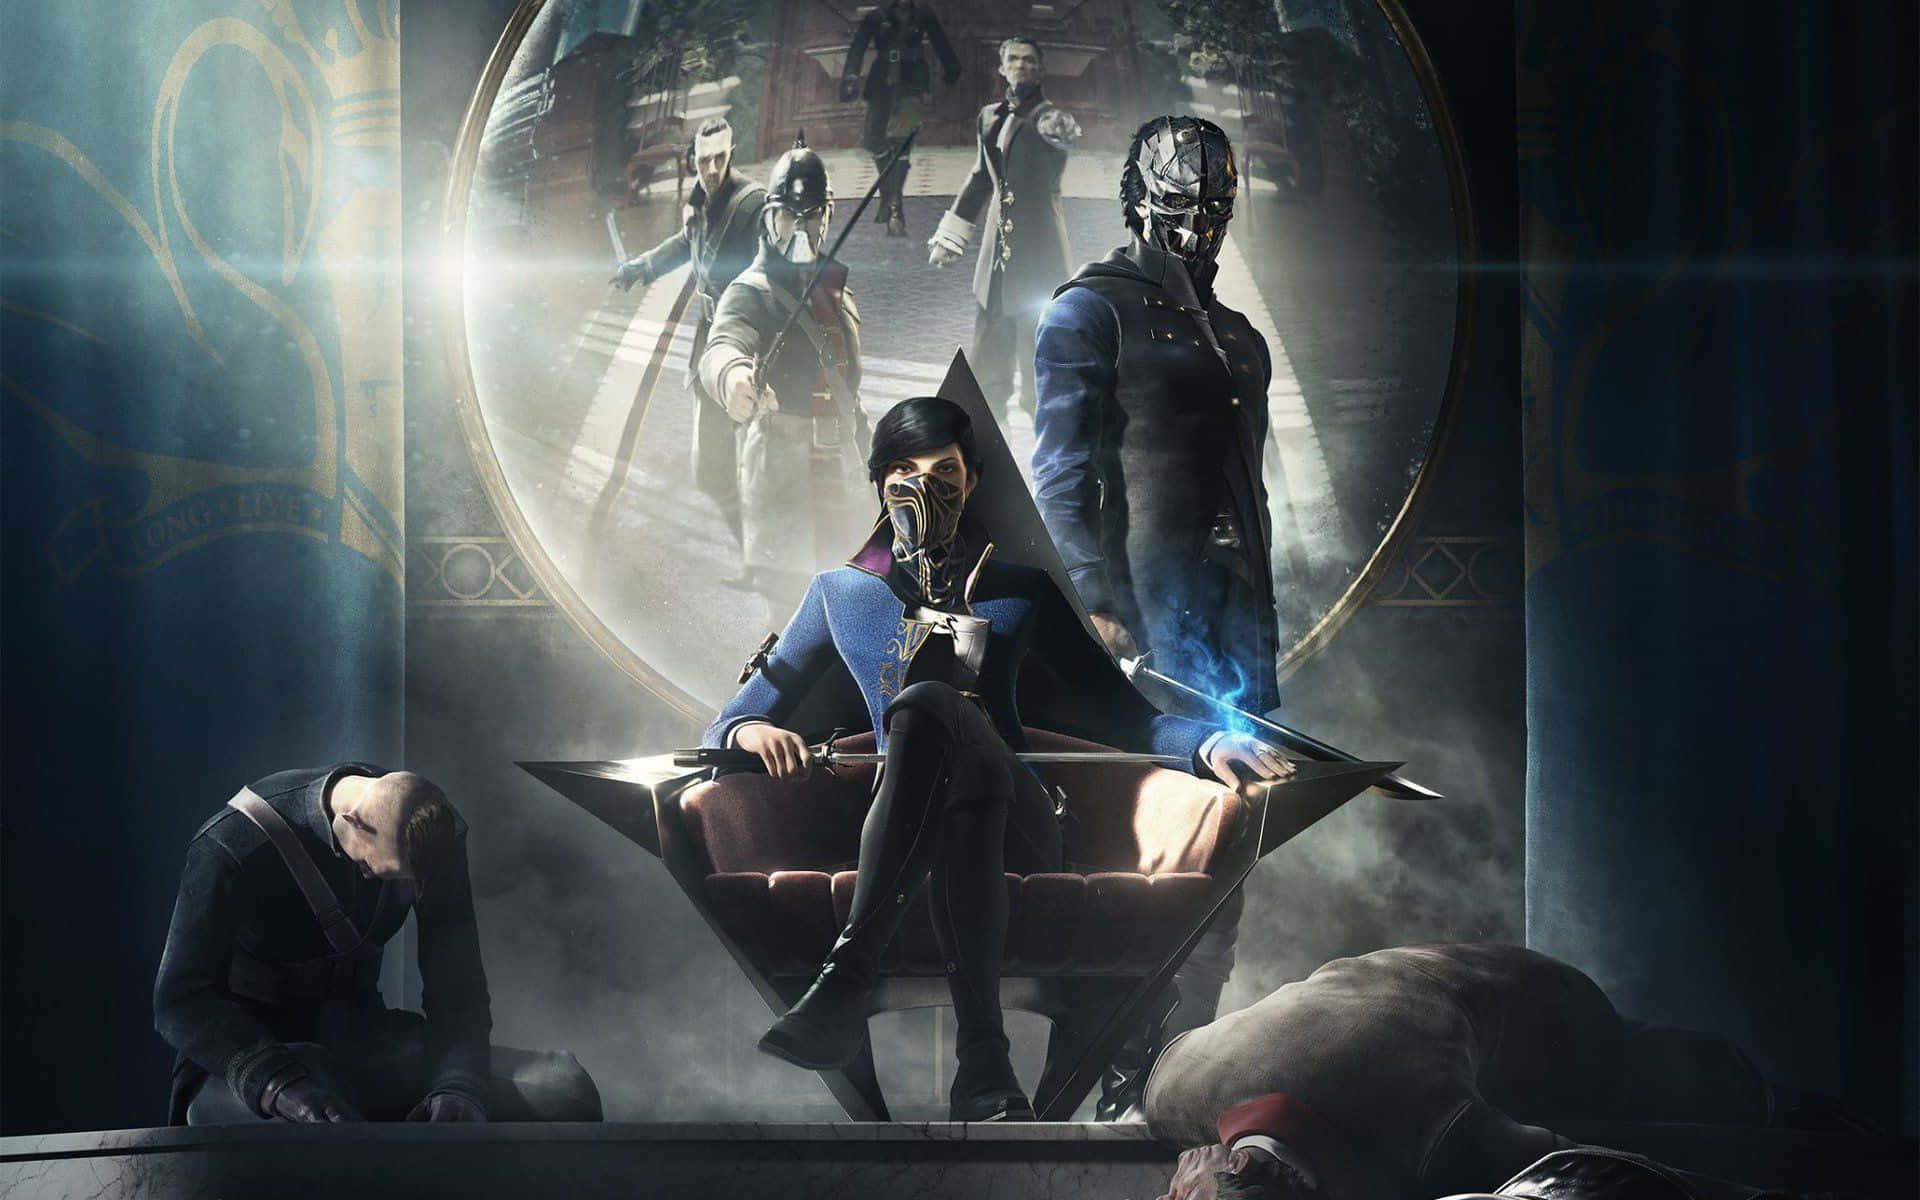 Emily Kaldwin On The Throne Best Dishonored 2 Background